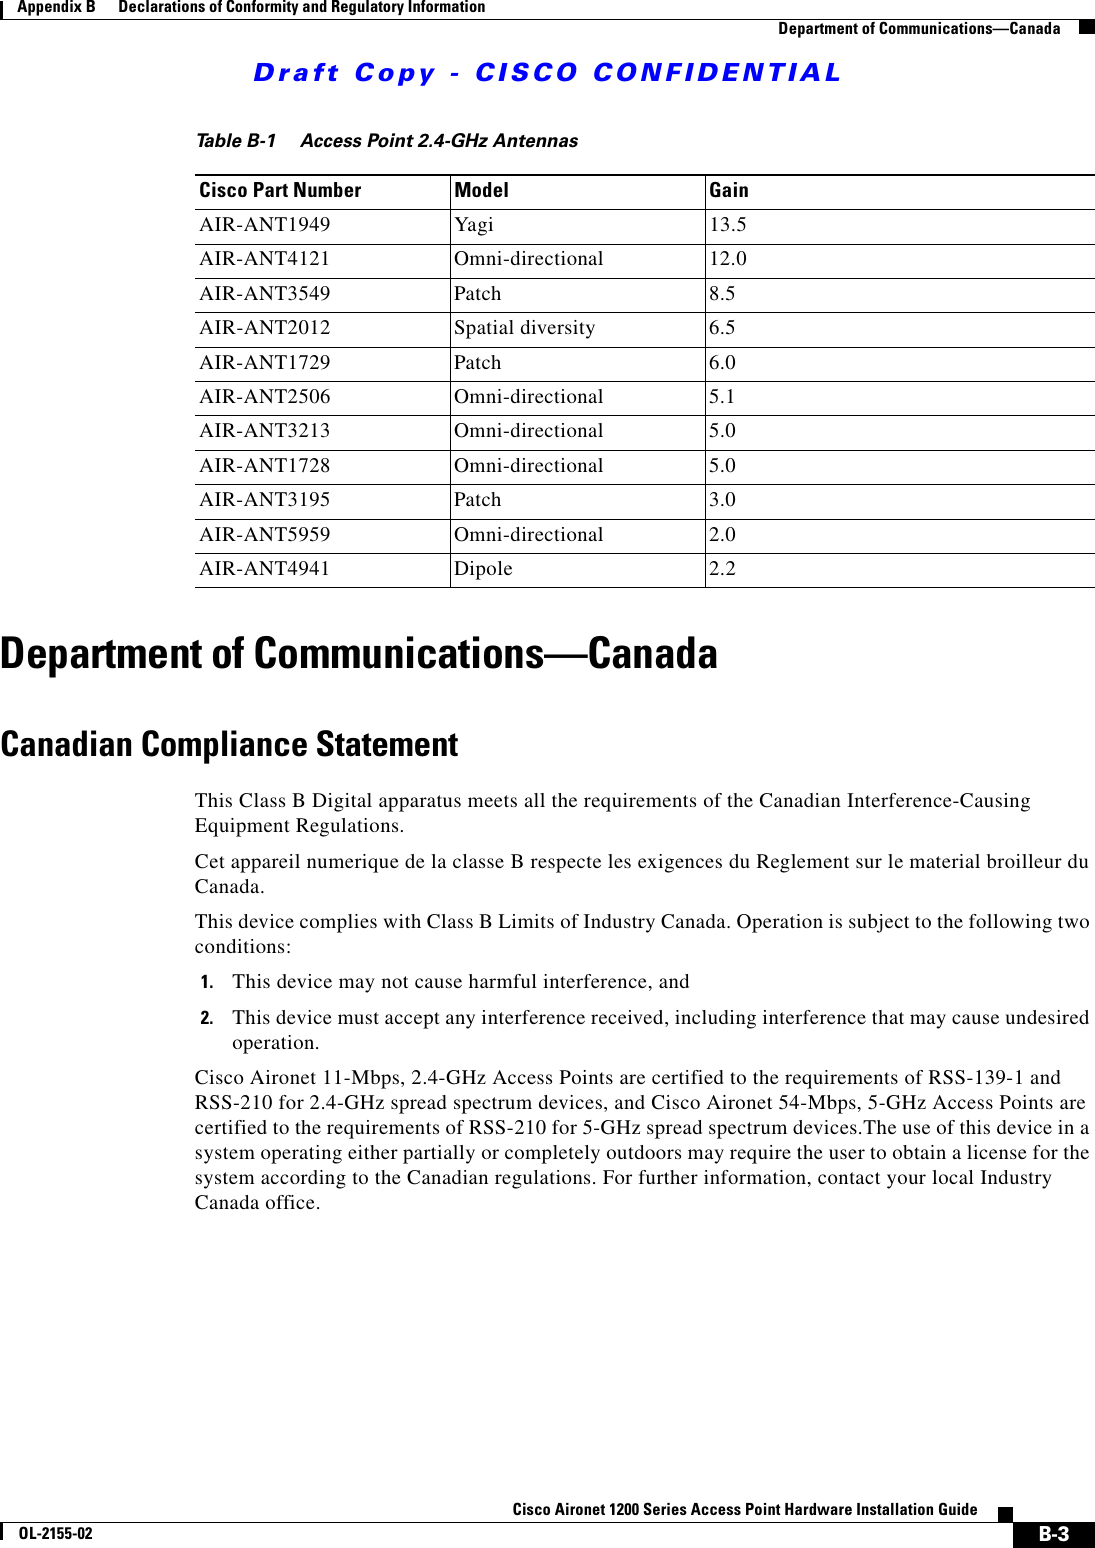 Draft Copy - CISCO CONFIDENTIAL B-3Cisco Aironet 1200 Series Access Point Hardware Installation GuideOL-2155-02Appendix B      Declarations of Conformity and Regulatory InformationDepartment of Communications—CanadaDepartment of Communications—CanadaCanadian Compliance StatementThis Class B Digital apparatus meets all the requirements of the Canadian Interference-Causing Equipment Regulations.Cet appareil numerique de la classe B respecte les exigences du Reglement sur le material broilleur du Canada.This device complies with Class B Limits of Industry Canada. Operation is subject to the following two conditions:1. This device may not cause harmful interference, and2. This device must accept any interference received, including interference that may cause undesired operation.Cisco Aironet 11-Mbps, 2.4-GHz Access Points are certified to the requirements of RSS-139-1 and RSS-210 for 2.4-GHz spread spectrum devices, and Cisco Aironet 54-Mbps, 5-GHz Access Points are certified to the requirements of RSS-210 for 5-GHz spread spectrum devices.The use of this device in a system operating either partially or completely outdoors may require the user to obtain a license for the system according to the Canadian regulations. For further information, contact your local Industry Canada office.Table B-1 Access Point 2.4-GHz AntennasCisco Part Number Model GainAIR-ANT1949 Yagi 13.5AIR-ANT4121 Omni-directional 12.0AIR-ANT3549 Patch 8.5AIR-ANT2012 Spatial diversity 6.5AIR-ANT1729 Patch 6.0AIR-ANT2506 Omni-directional 5.1AIR-ANT3213 Omni-directional 5.0AIR-ANT1728 Omni-directional 5.0AIR-ANT3195 Patch 3.0AIR-ANT5959 Omni-directional 2.0AIR-ANT4941 Dipole 2.2